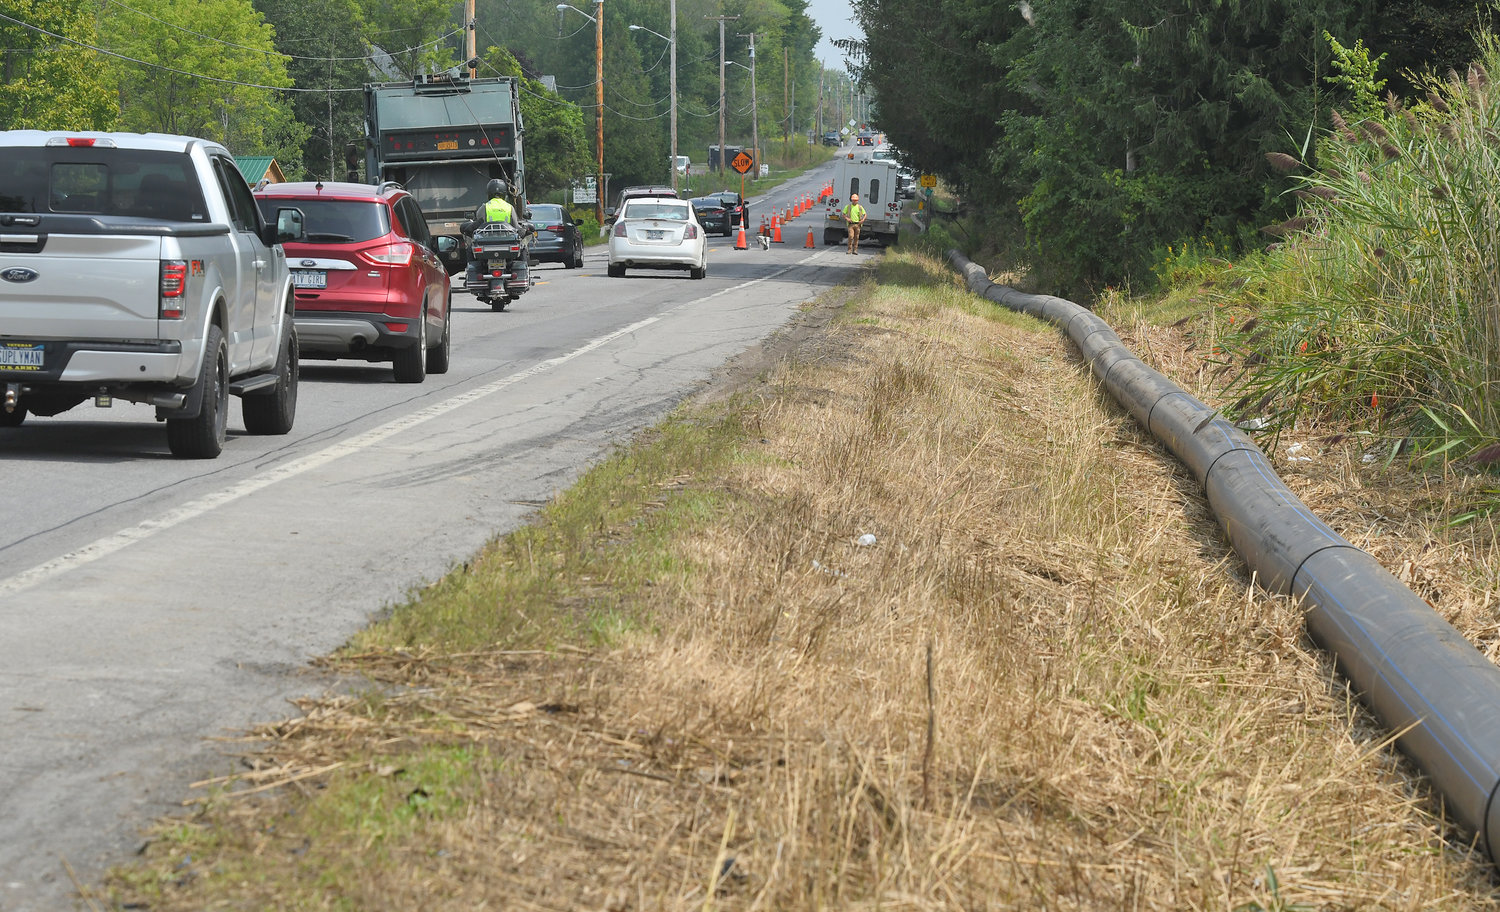 Pipe laid down on Route 26/46 looking north near New London Road in Rome on Friday, Aug. 26.